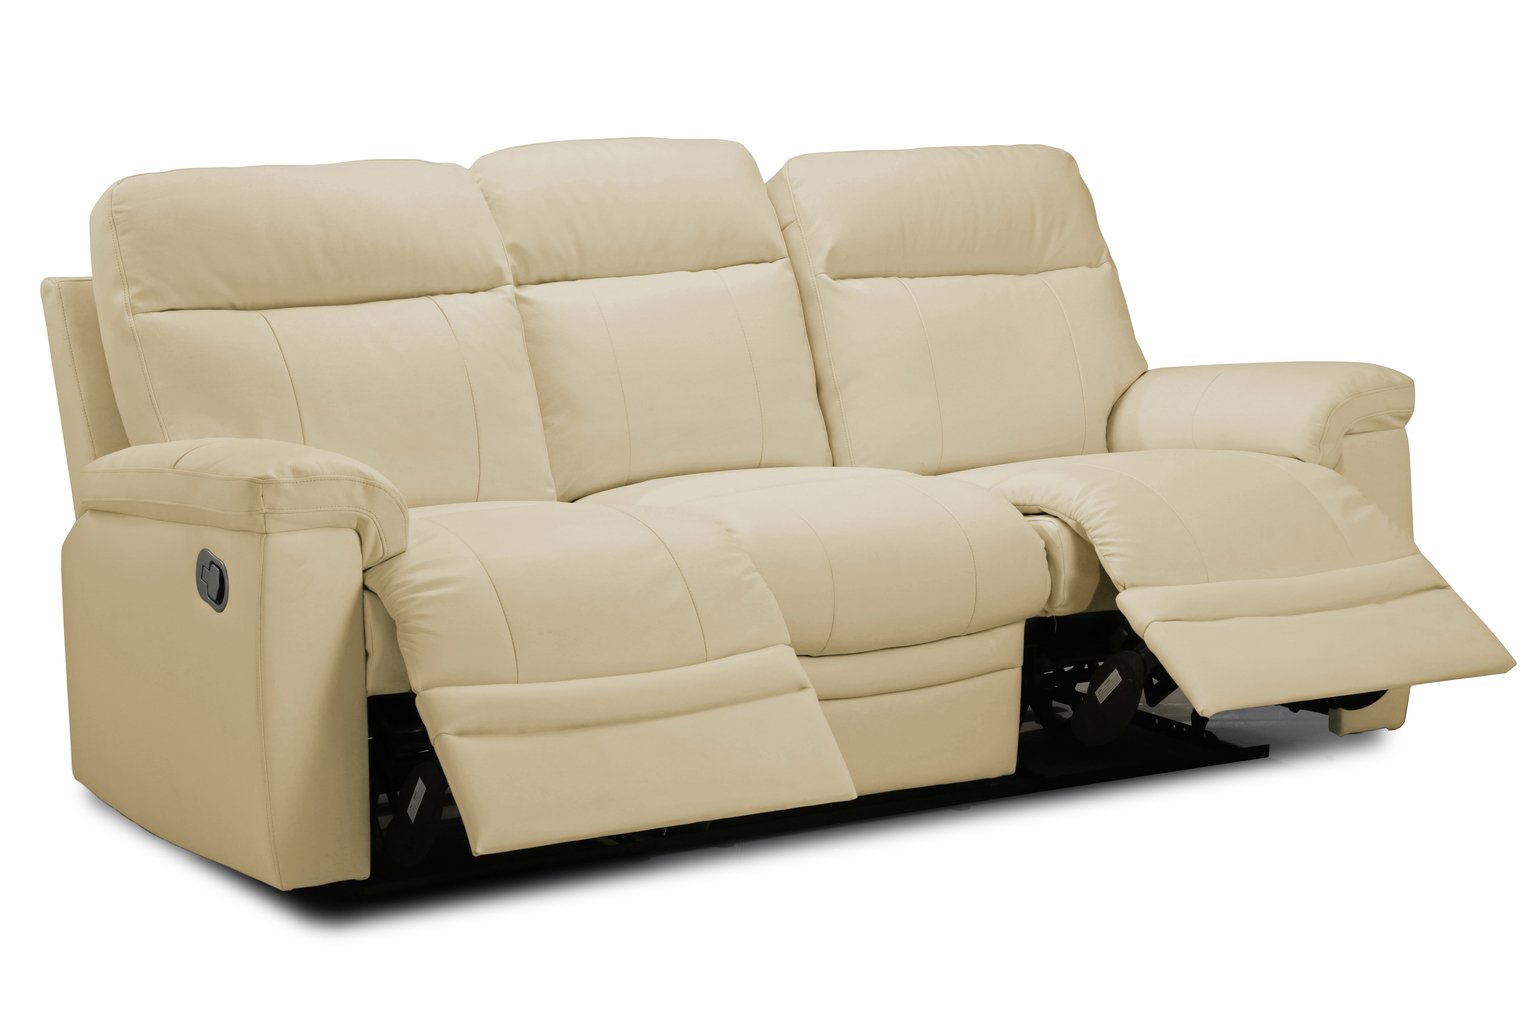 Argos Home New Paolo 3 Seater Manual Recliner Sofa - Ivory